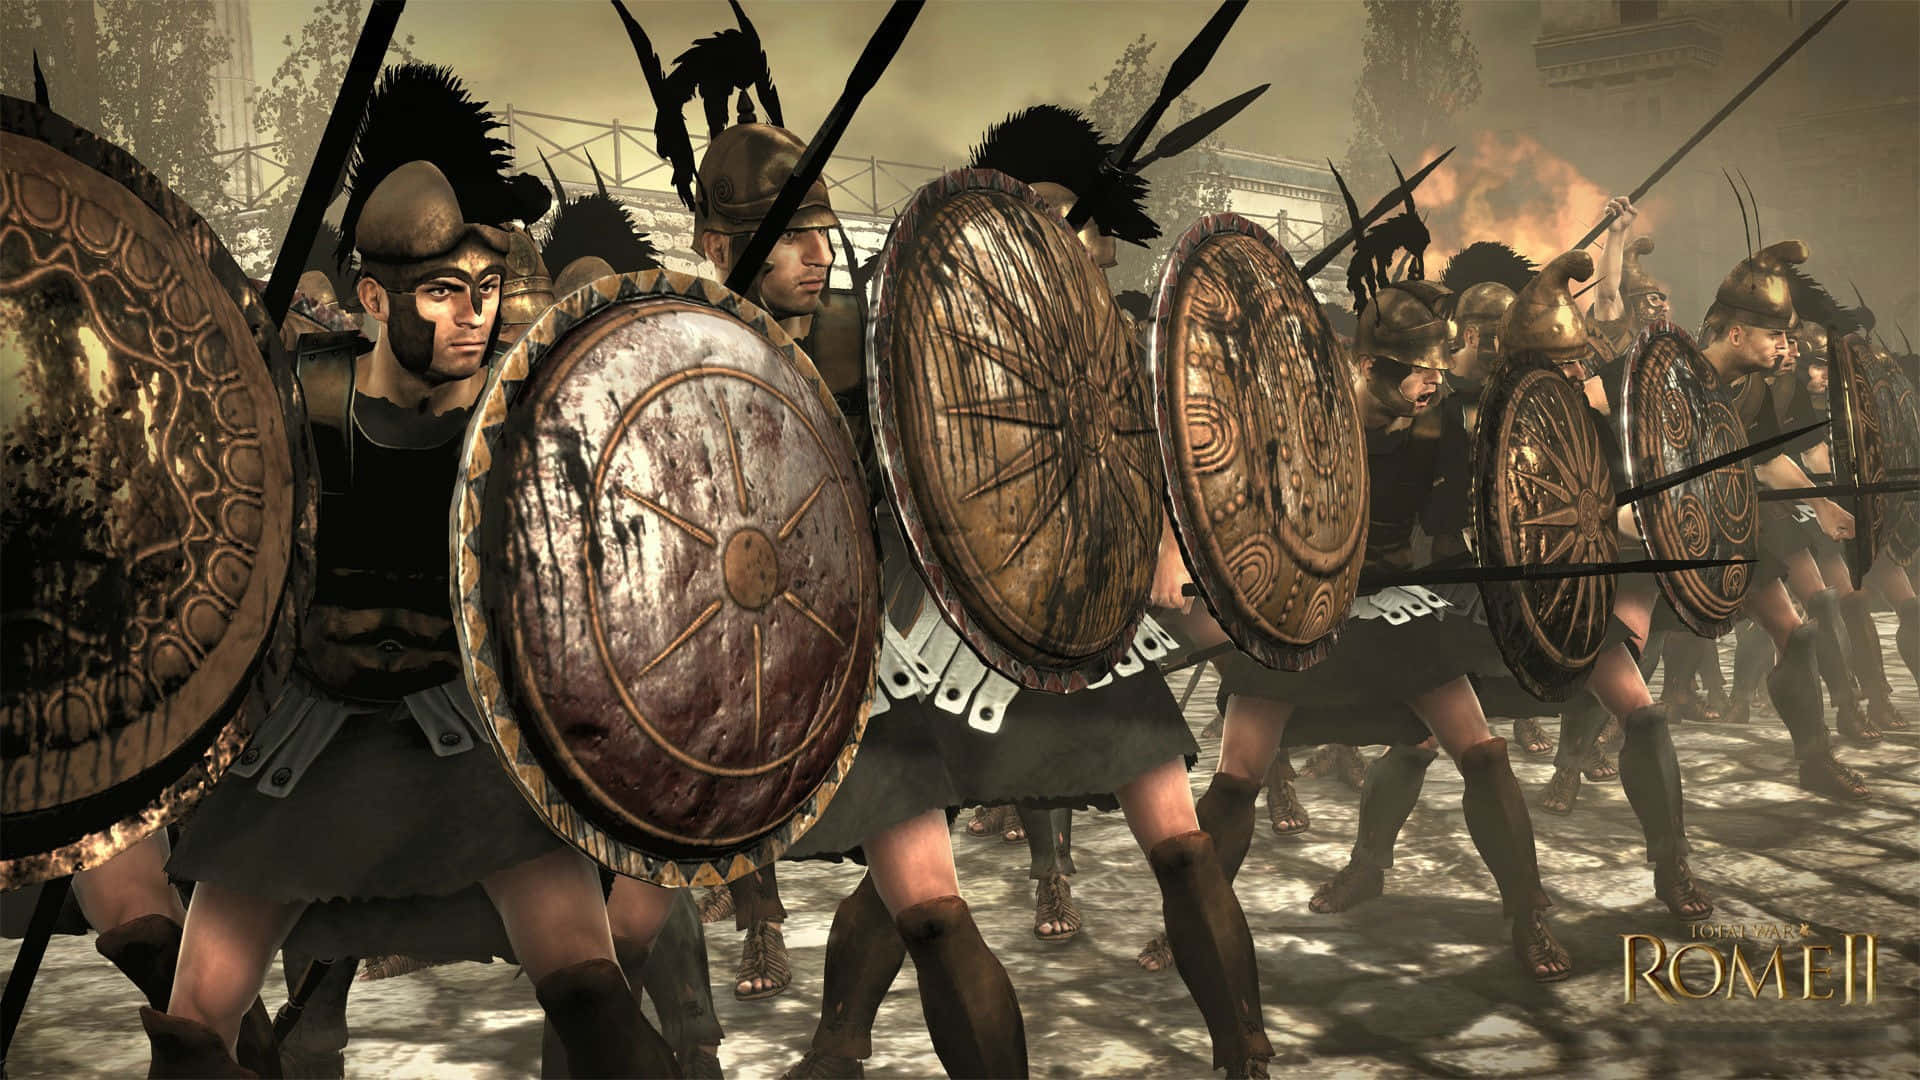 A Group Of Soldiers With Shields And Shields